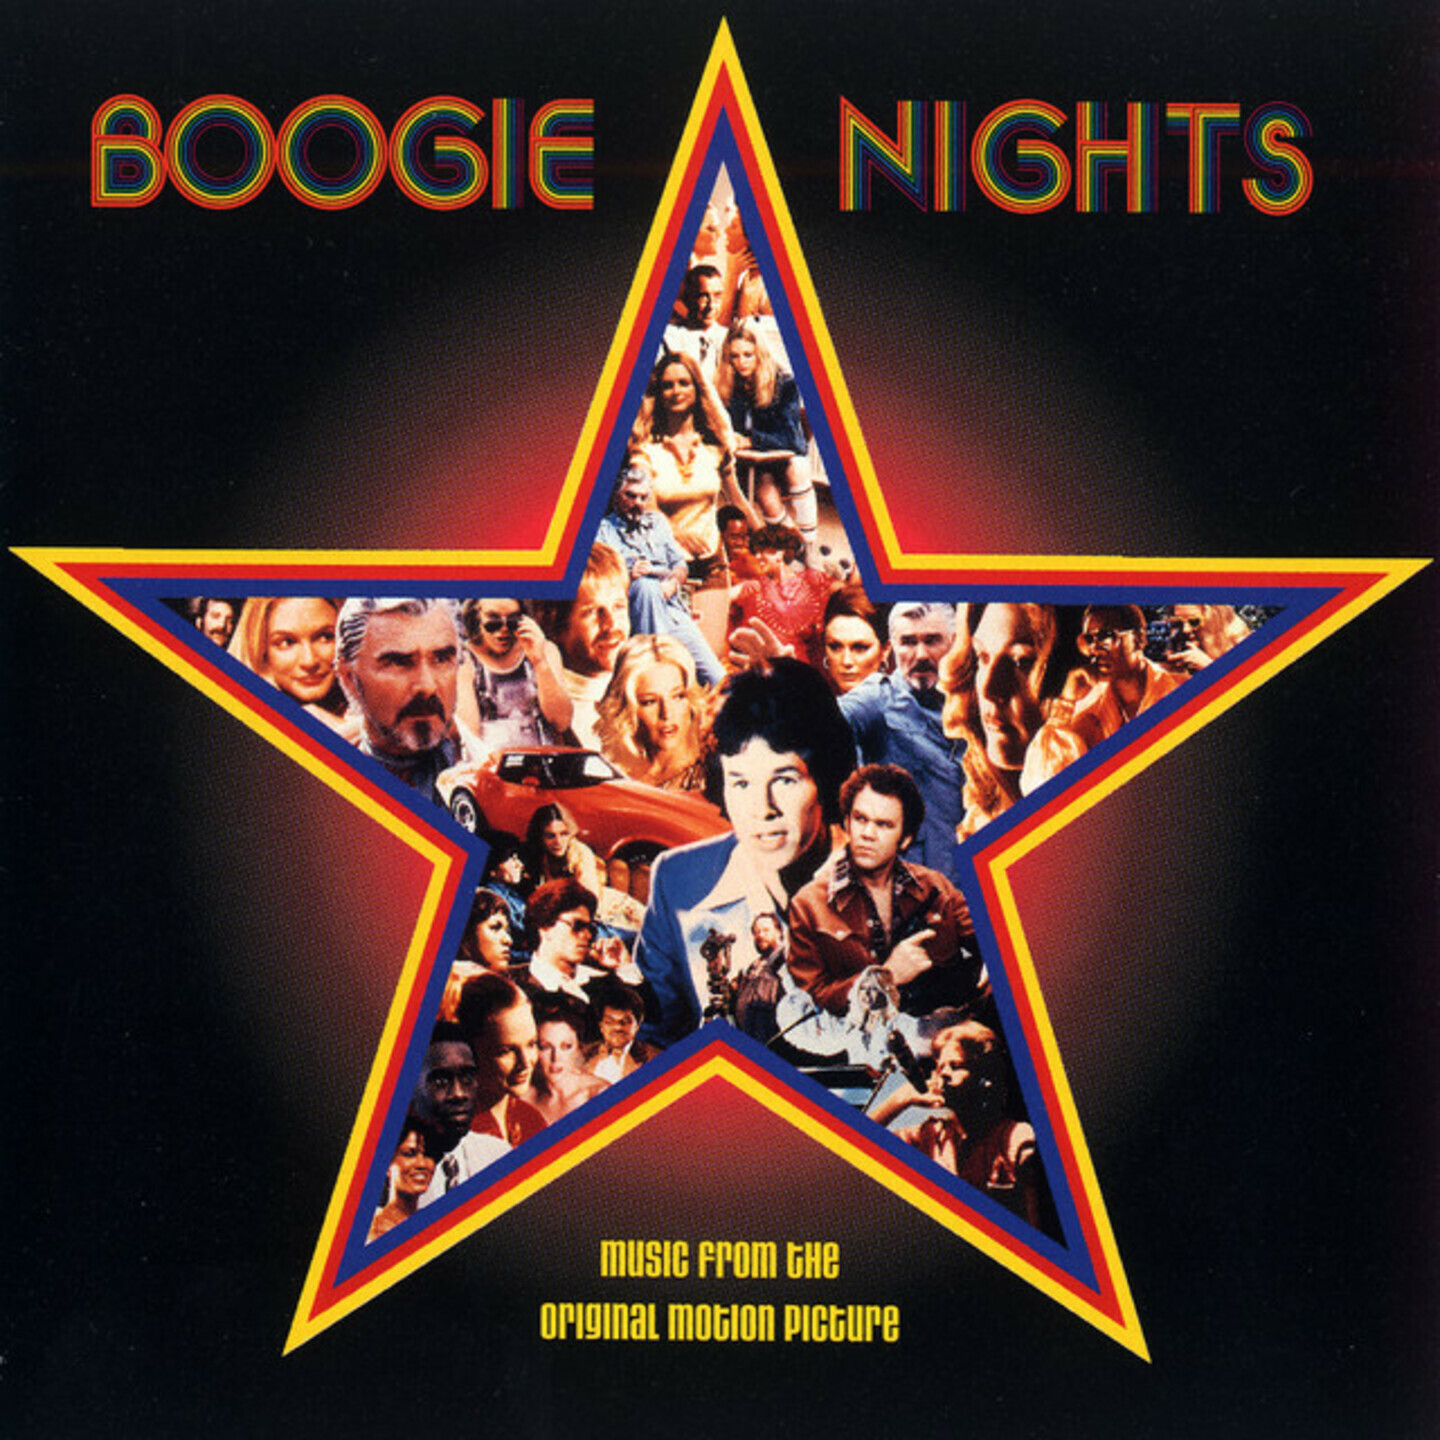 V/A - Boogie Nights (Music From Original Motion Picture) LP